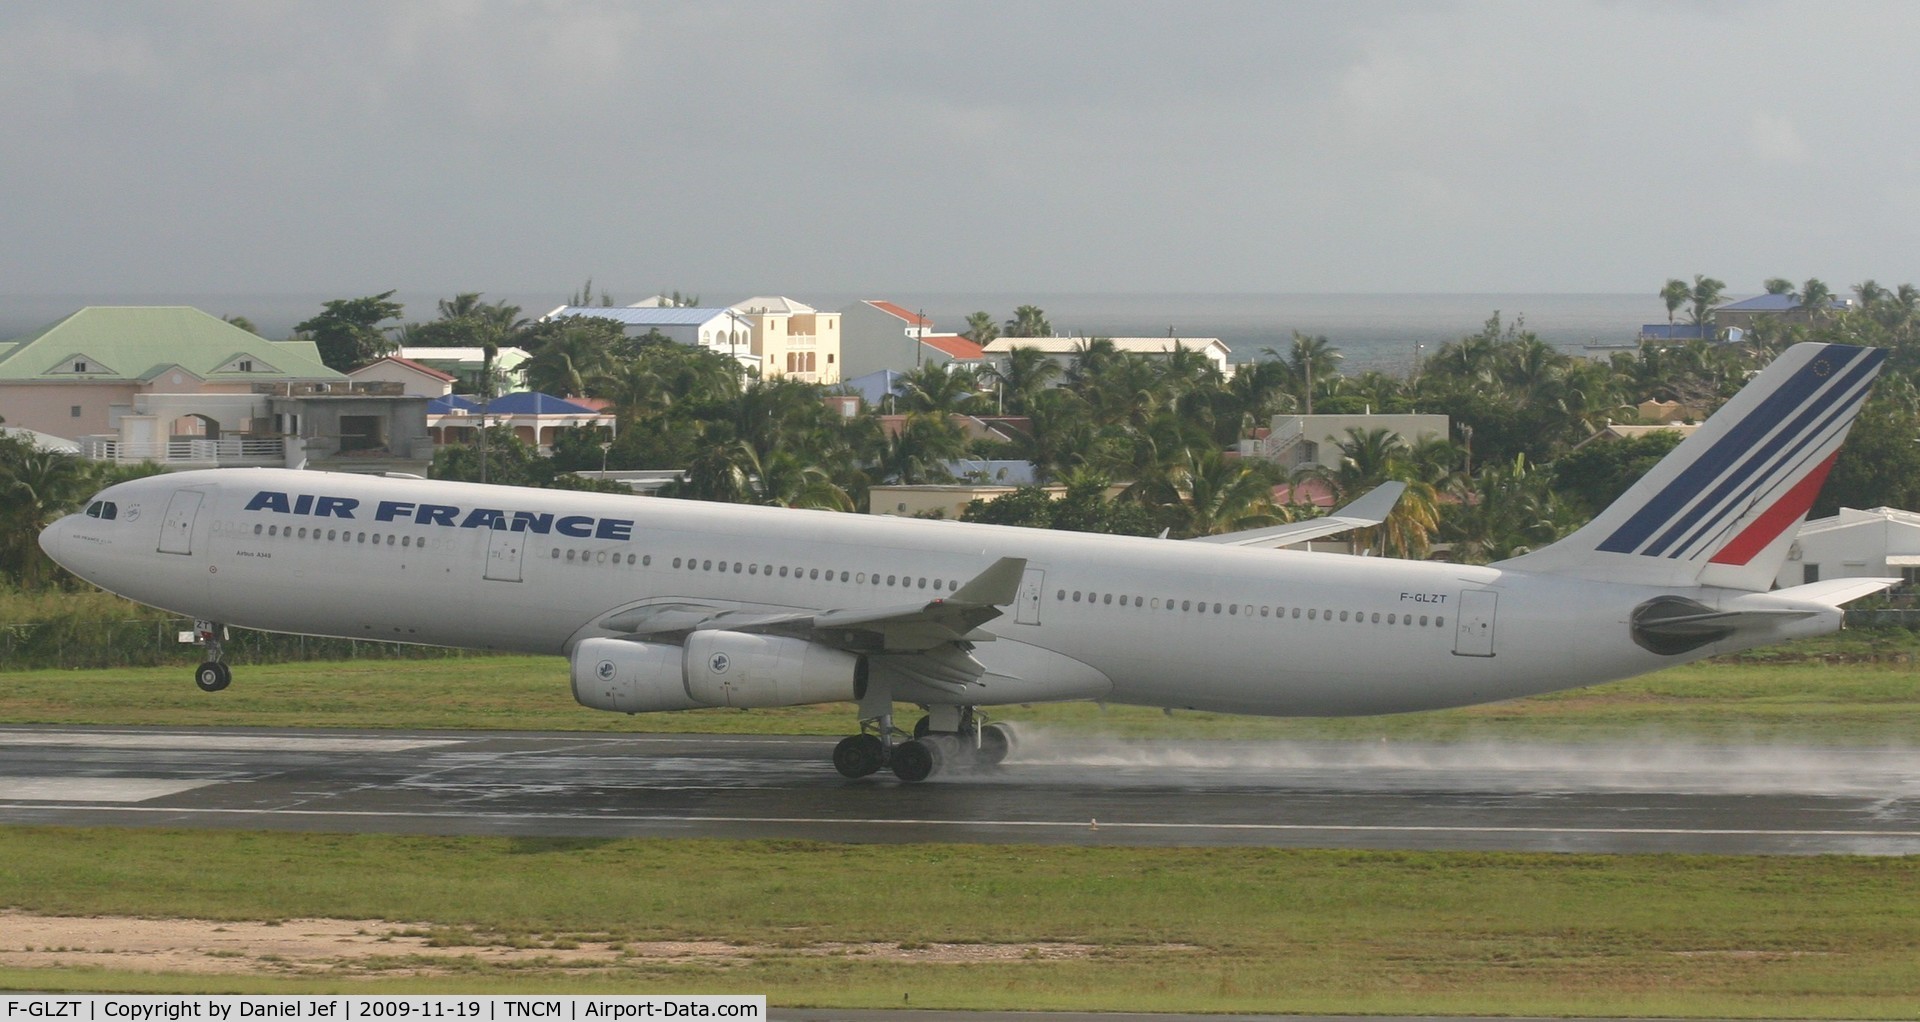 F-GLZT, 2000 Airbus A340-313X C/N 319, Airfrance landing on a very wet day.